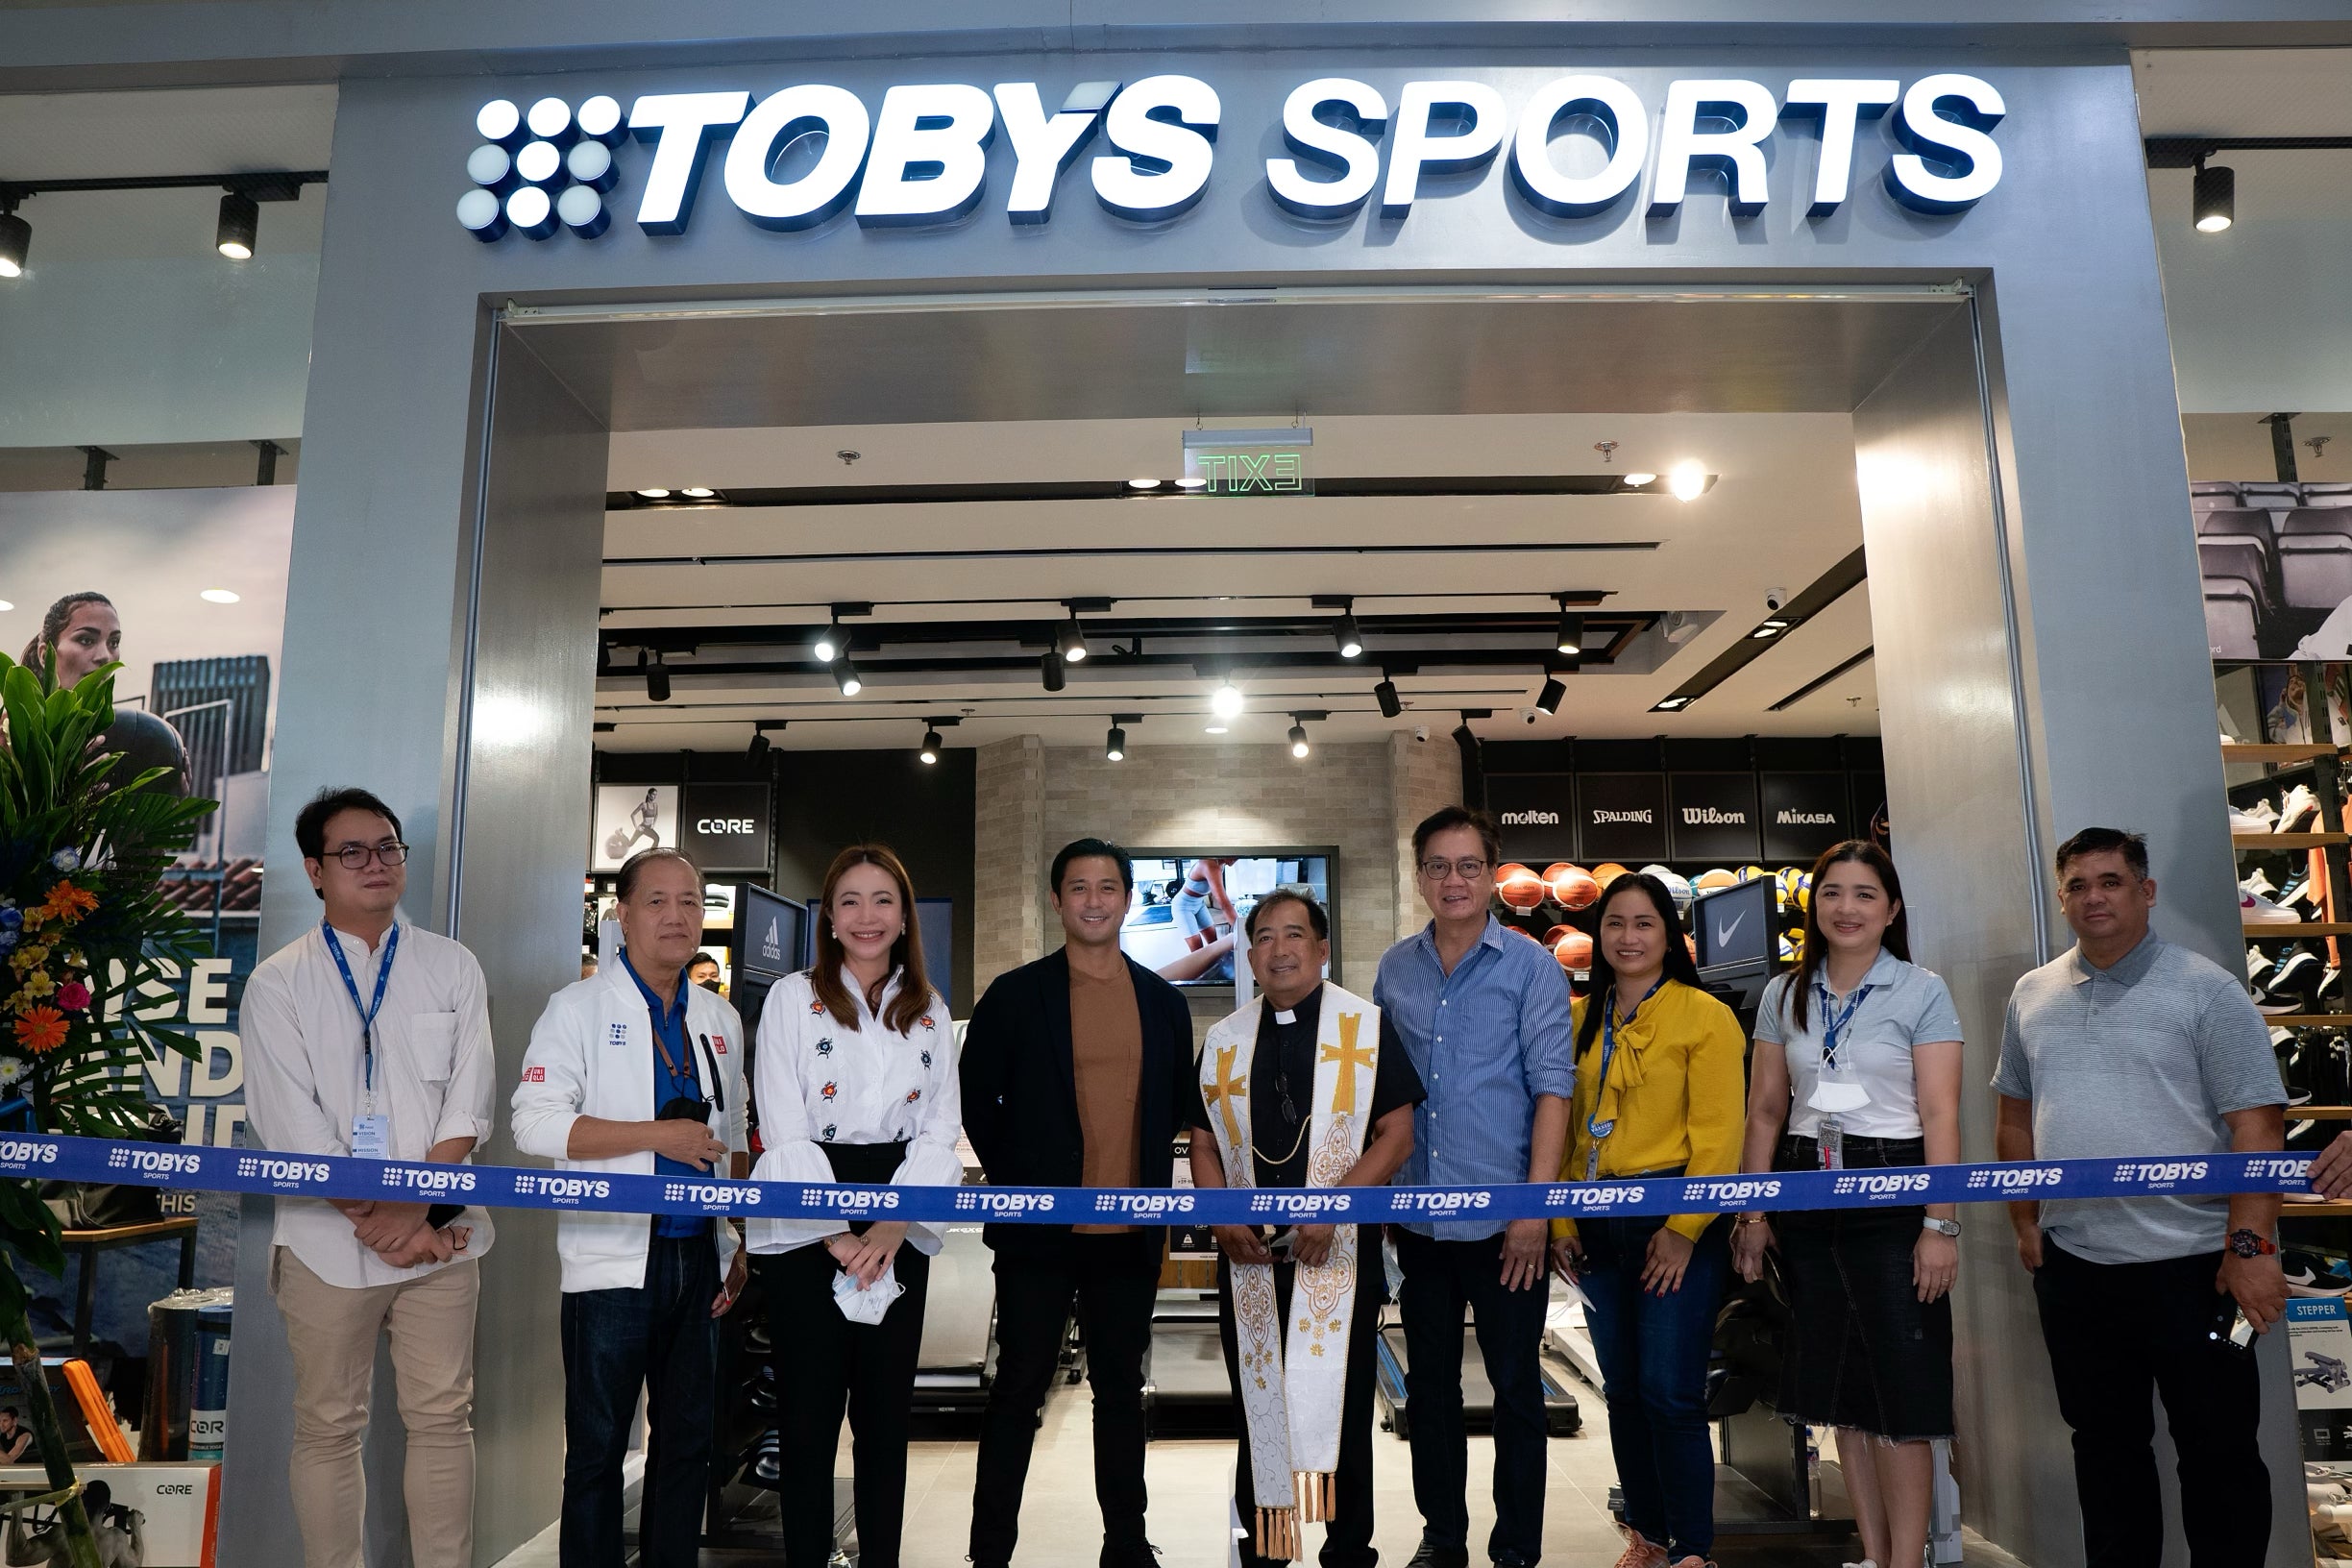 NBA Store opens in Megamall